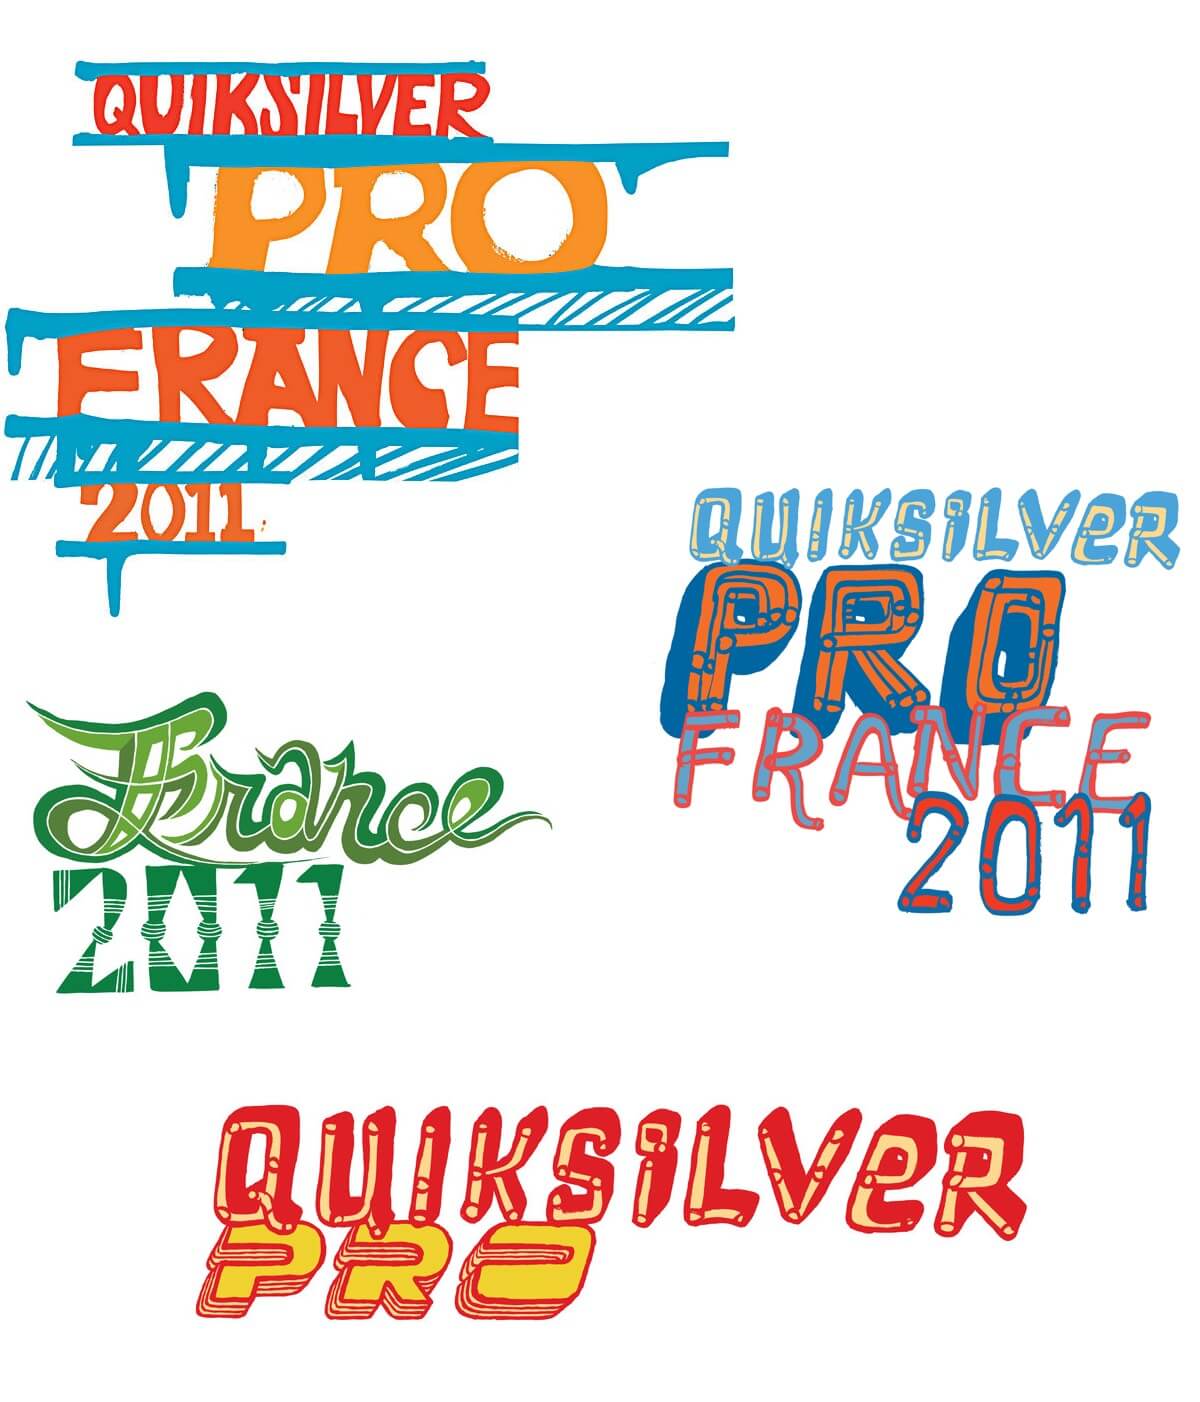 Quiksilver Pro France 2011 type explorations by George Bates